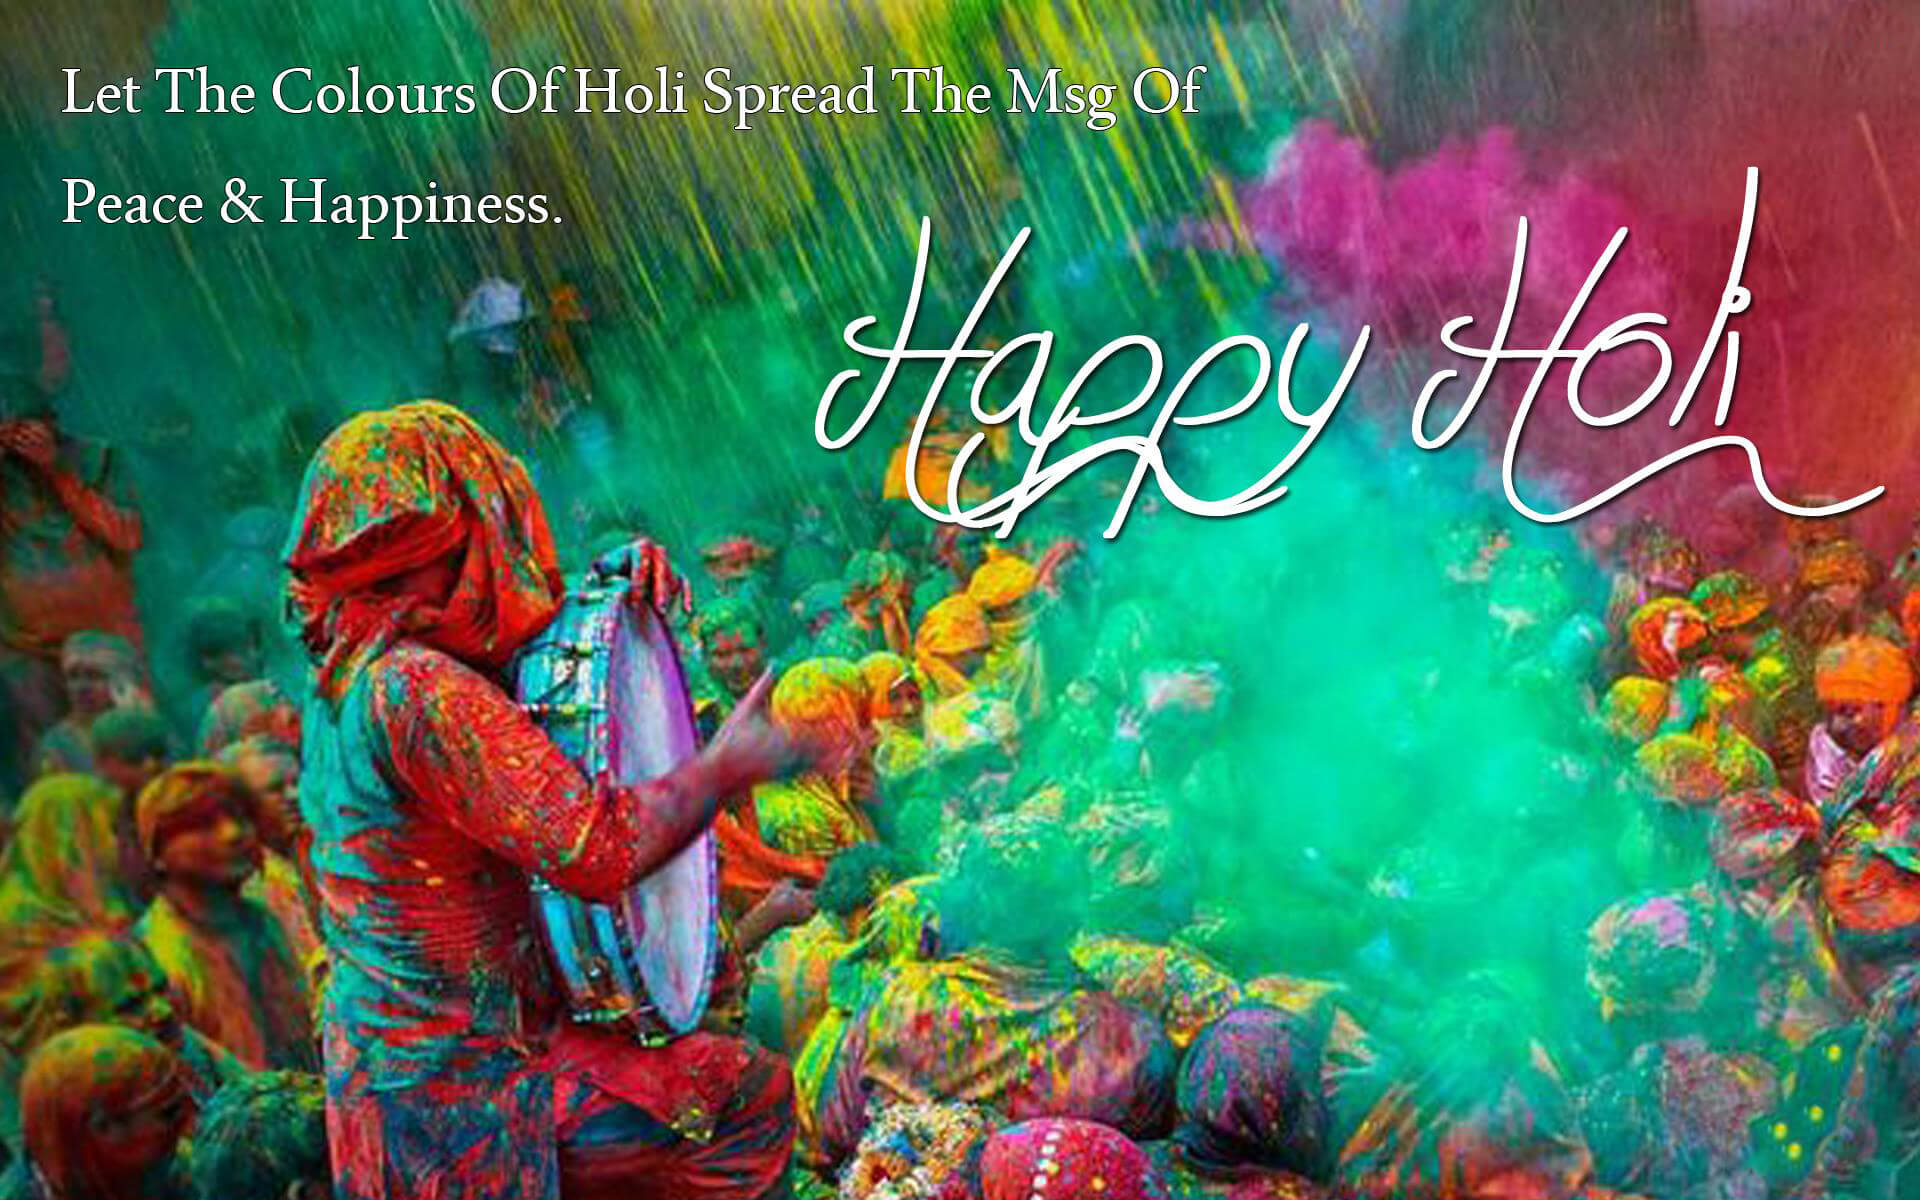 Happy Holi 2019 : Images Wallpapers HD, Wishes, SMS, Messages, Quotes